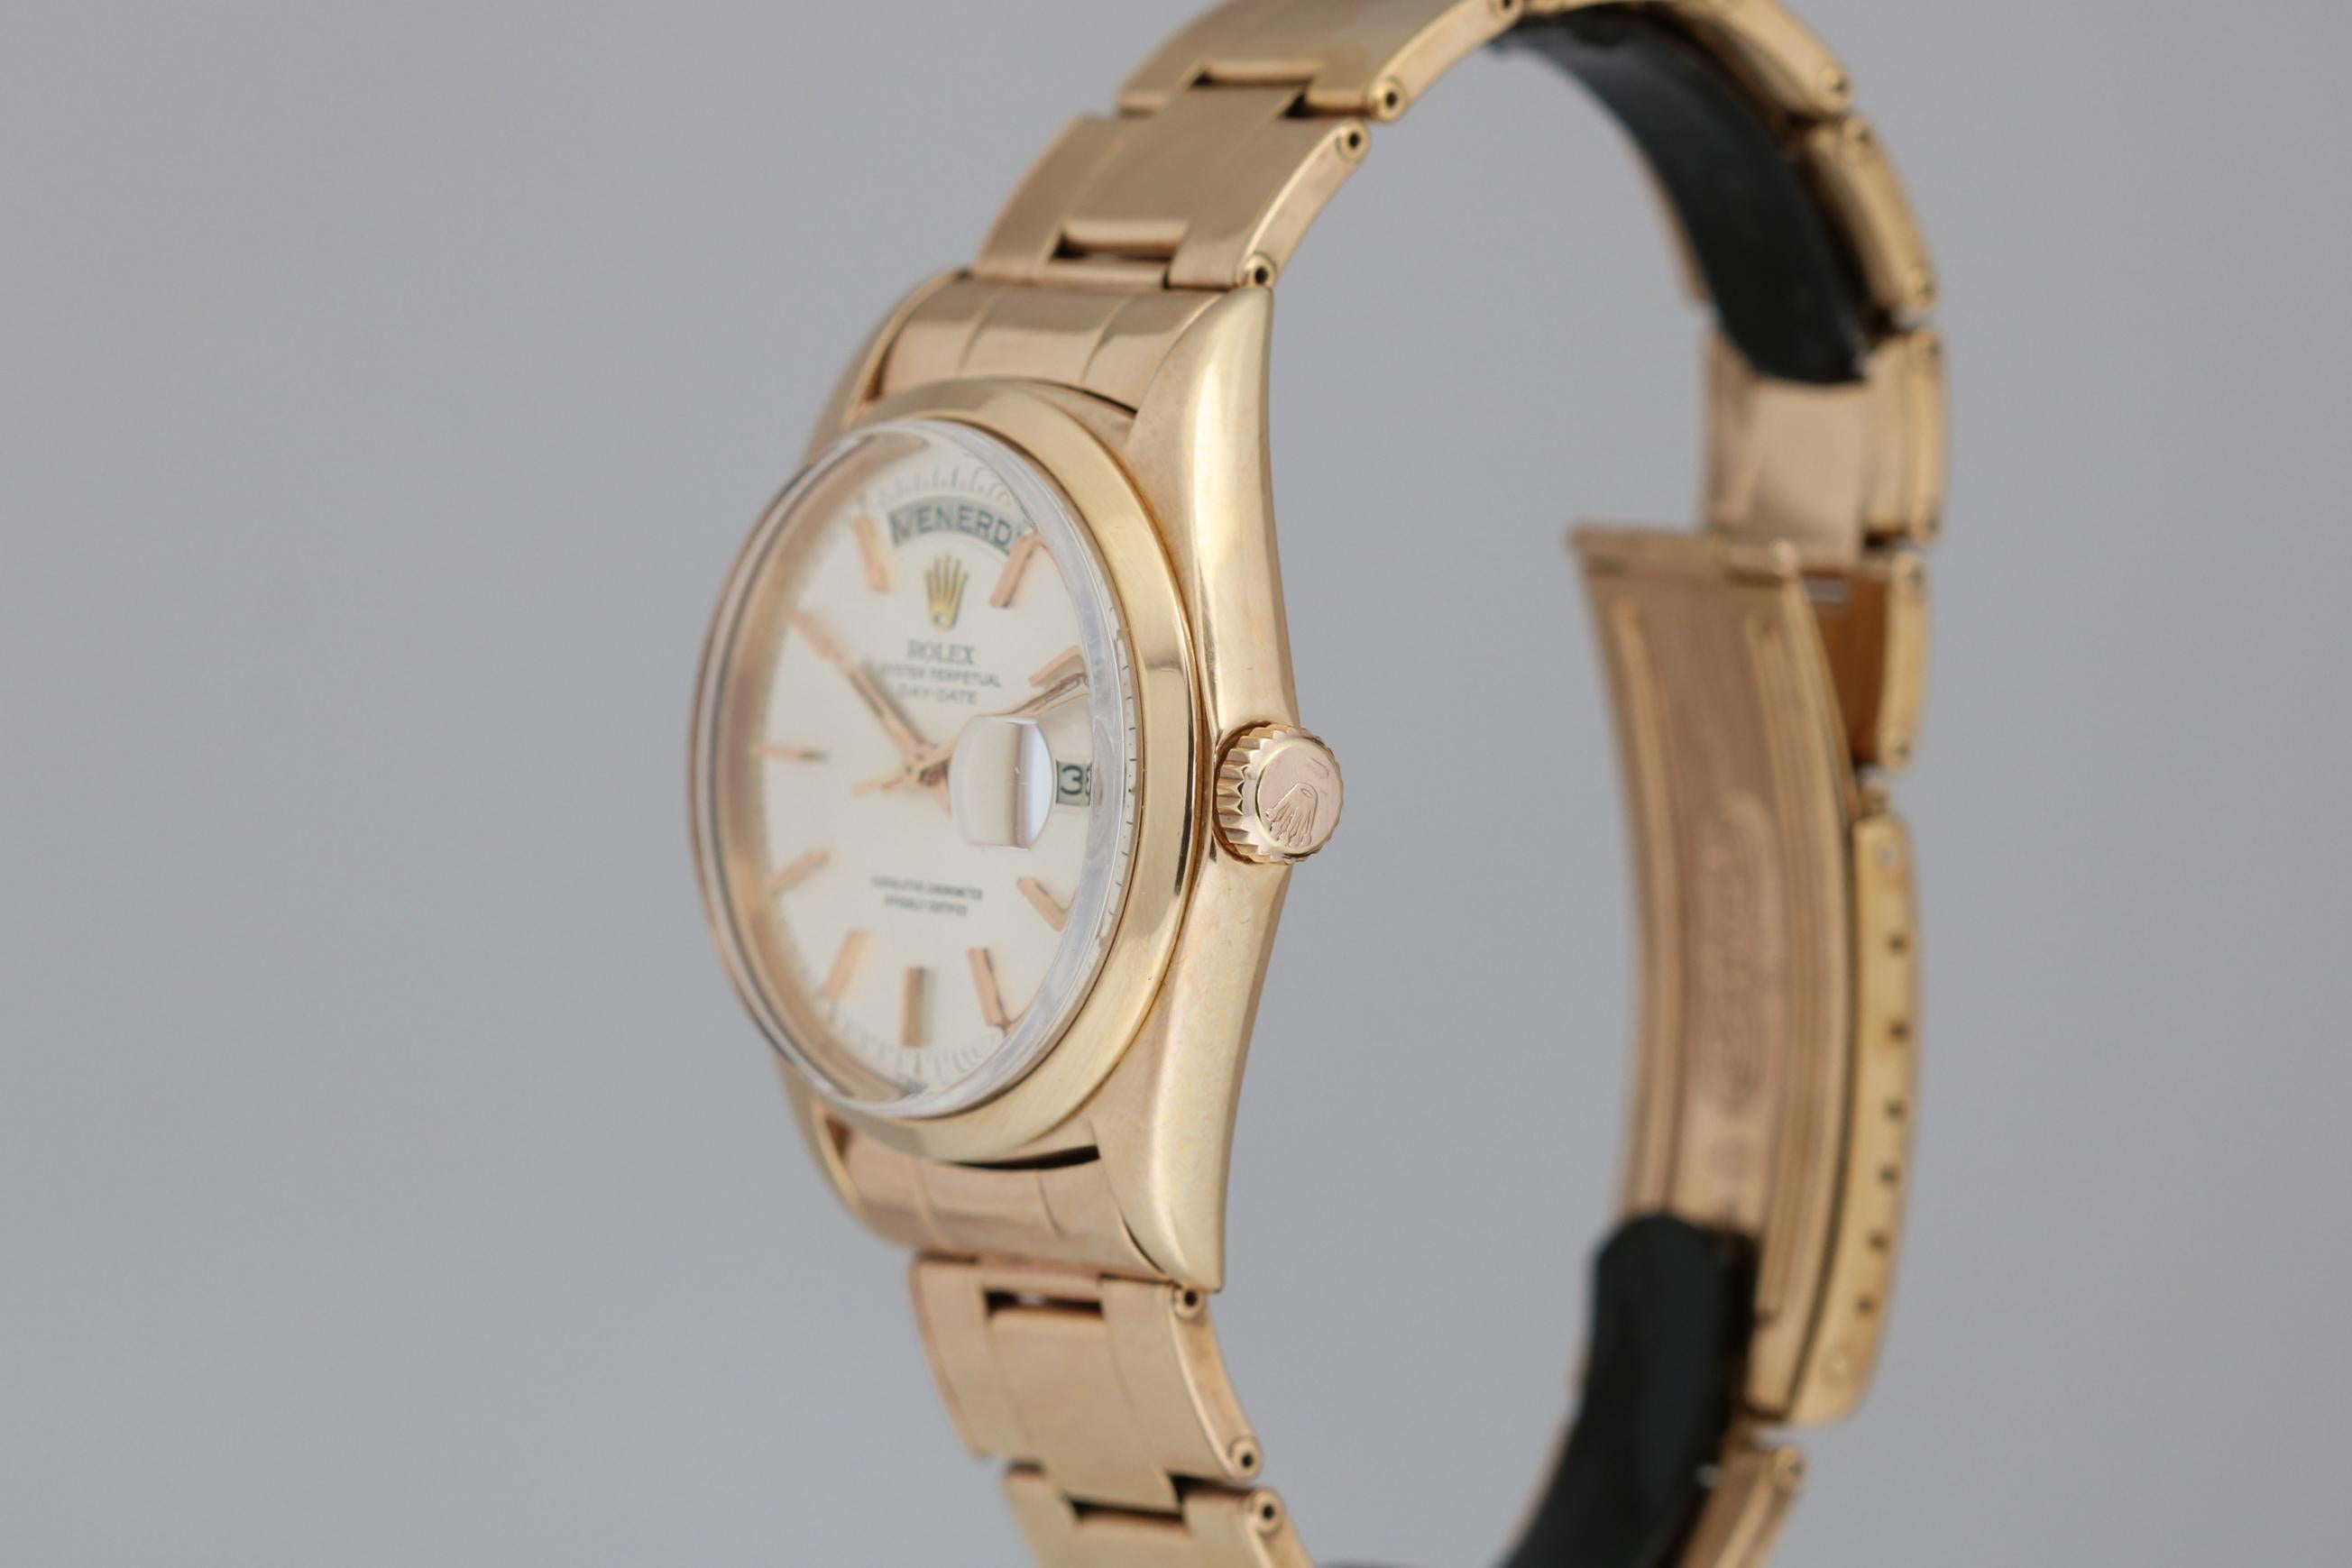 This is a Rolex 18kt  rose gold Day-Date reference 1802. This Day-Date reference is very special because it has a smooth bezel. It is a very rare reference and very desirable. This is a classic Rolex in excellent condition with a silver dial,